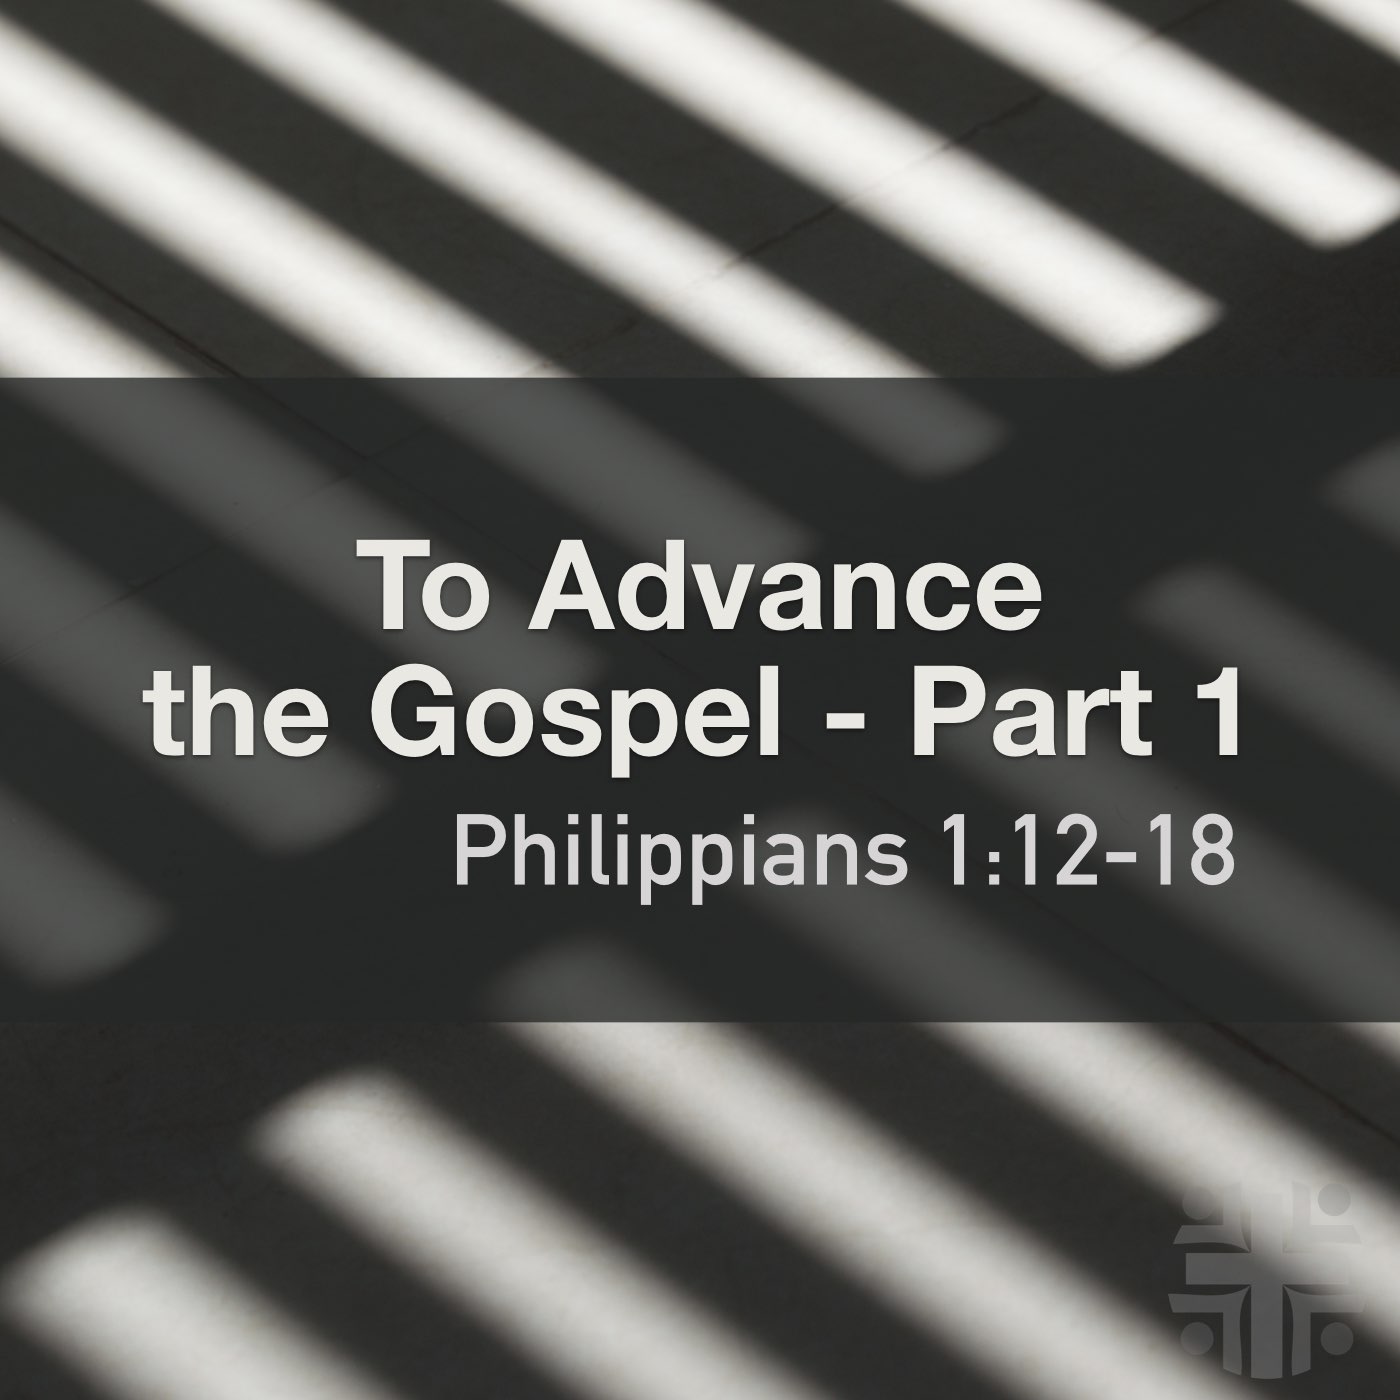 To Advance the Gospel - Part 1